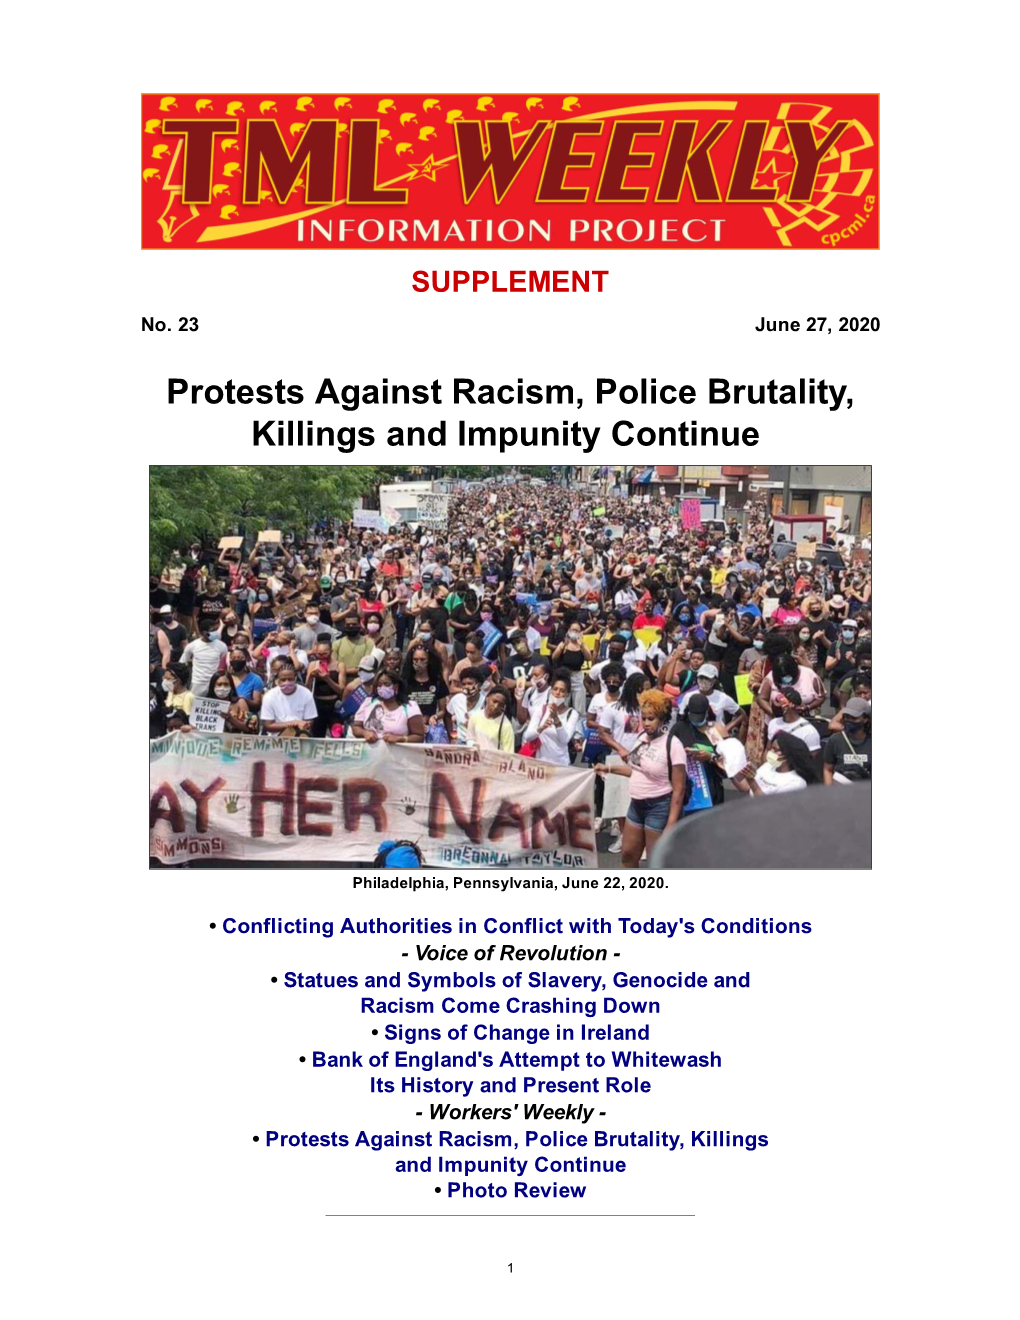 The Marxist-Leninist Weekly